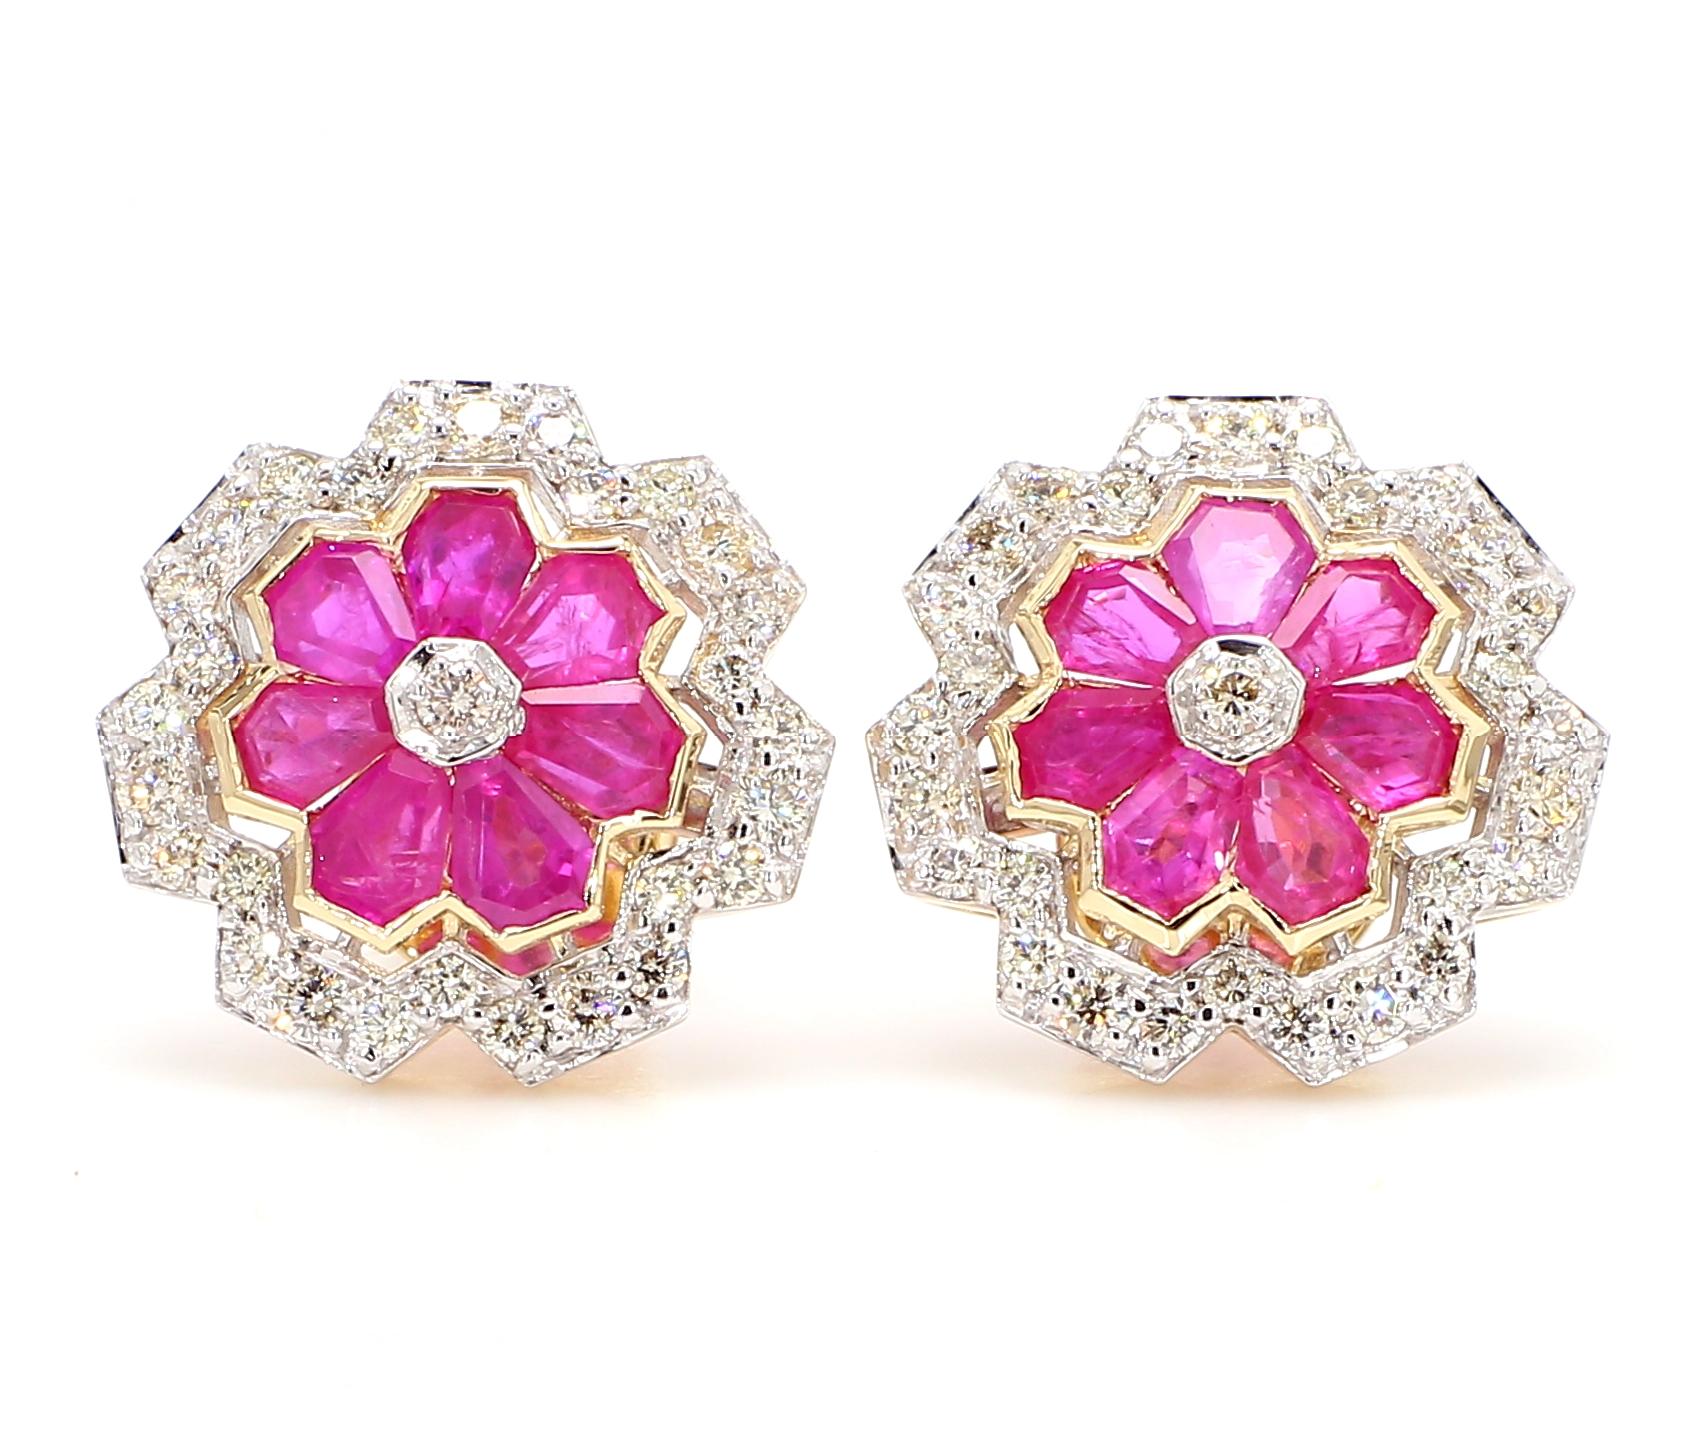 These exquisite earrings boast an elegant and captivating design that effortlessly combines the allure of rubies and the brilliance of round diamonds, all set in lustrous 18K yellow gold. Crafted in a unique geometric flower shape, each earring